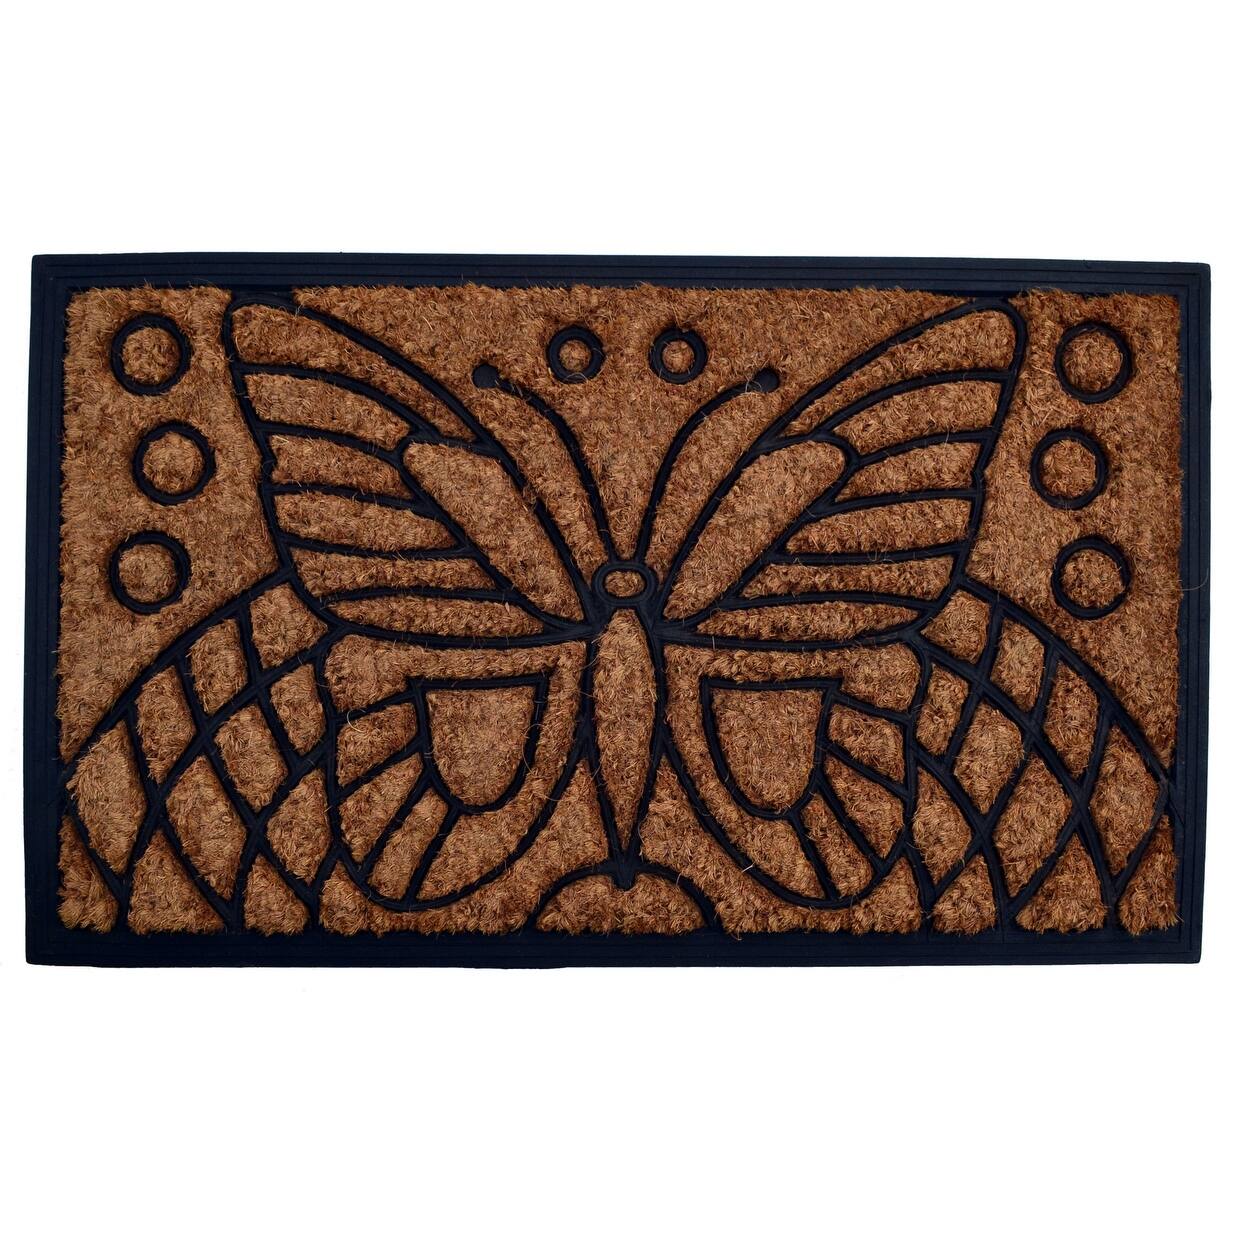 30" Brown and Black Butterfly Design Decorative Hand Woven Doormat